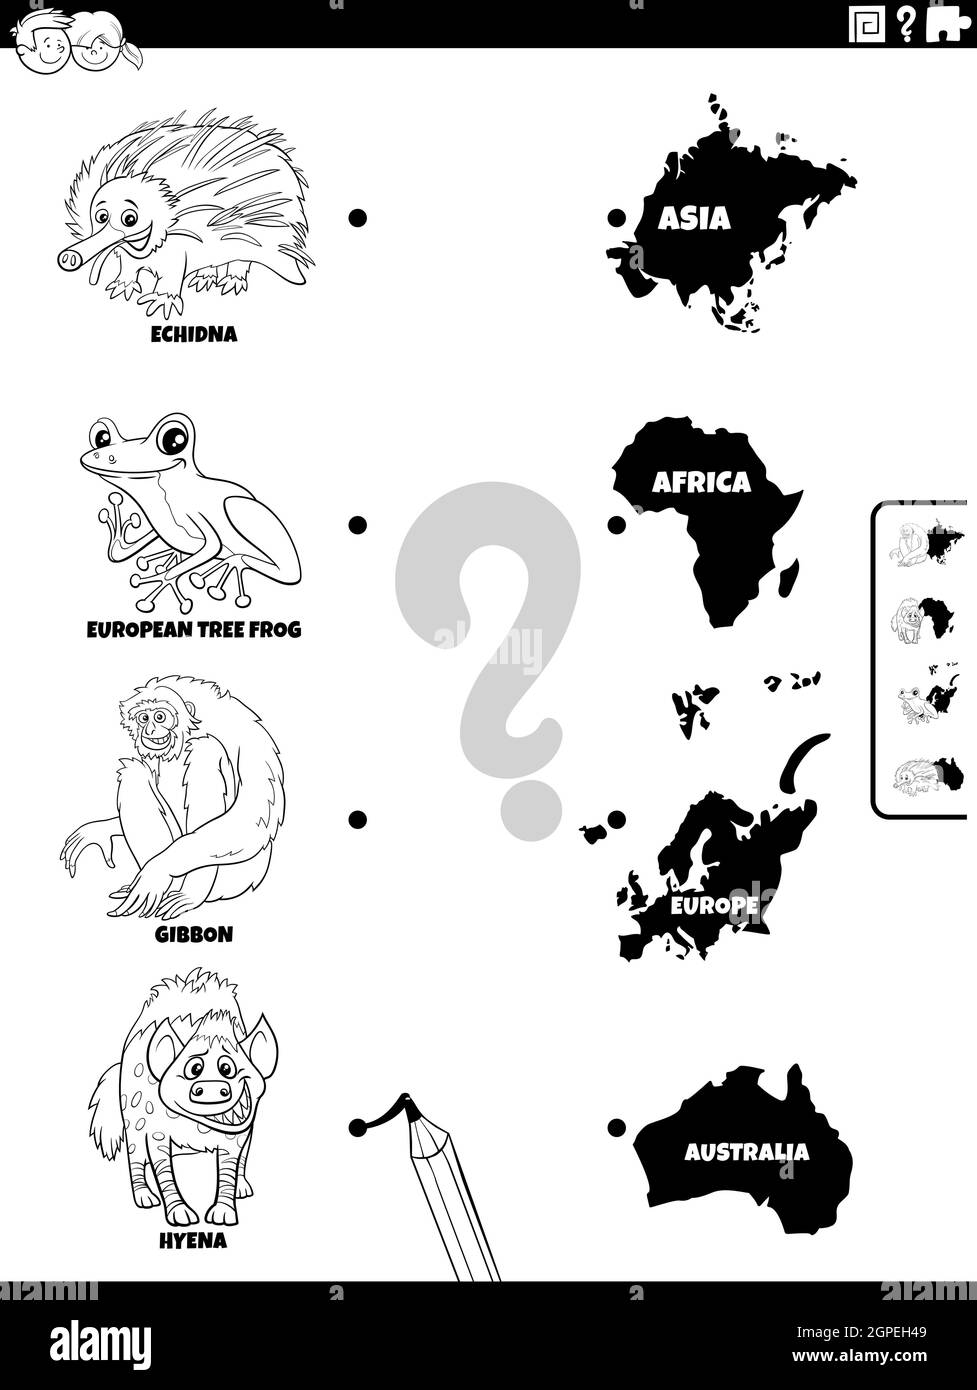 match animals and continents task coloring book page Stock Vector